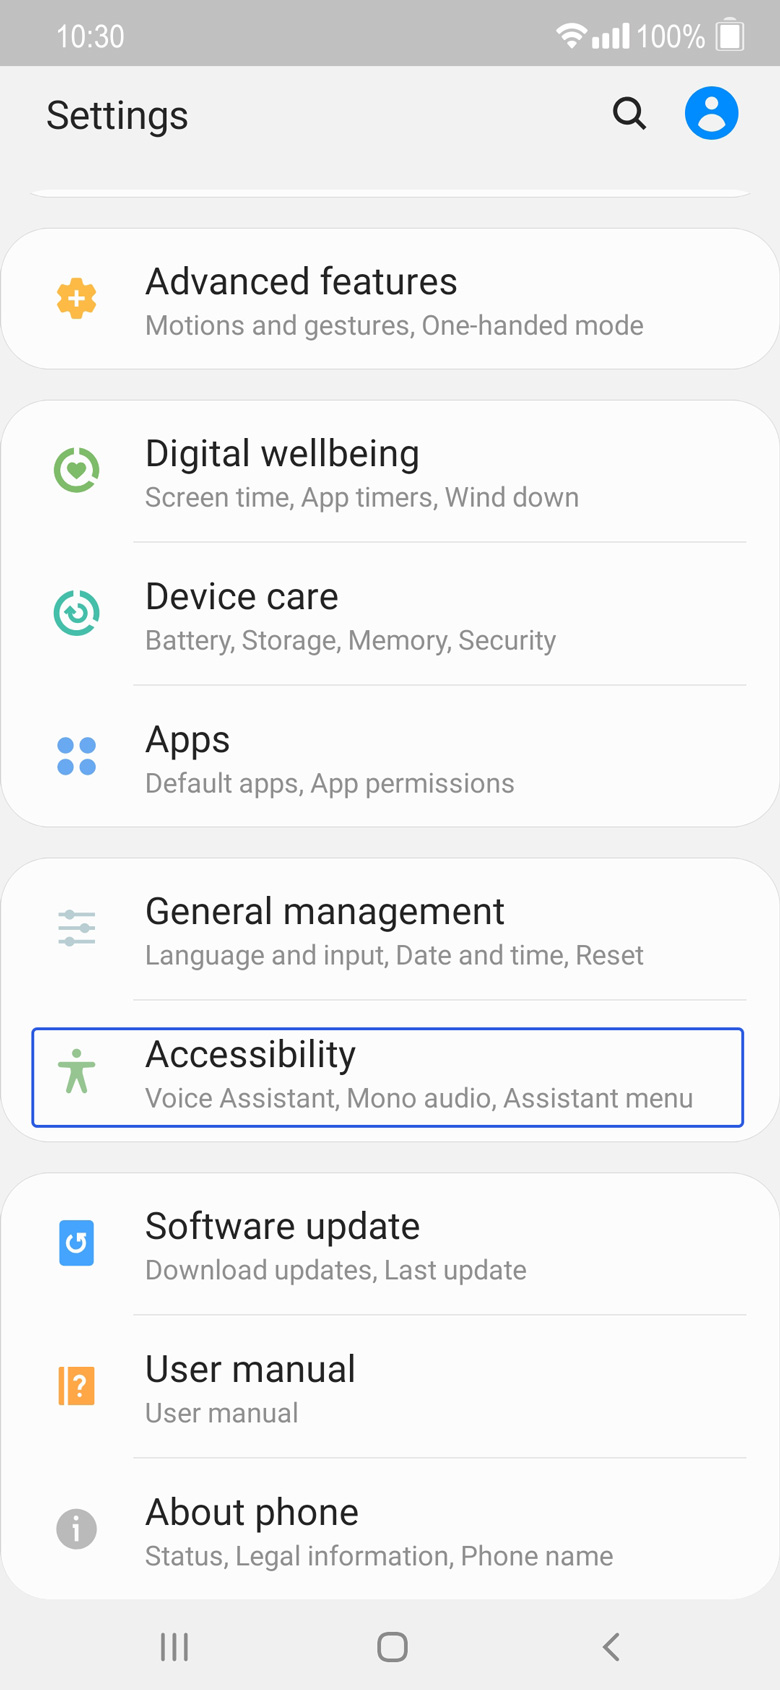 Phone Settings screen showing 'Accessibility' item